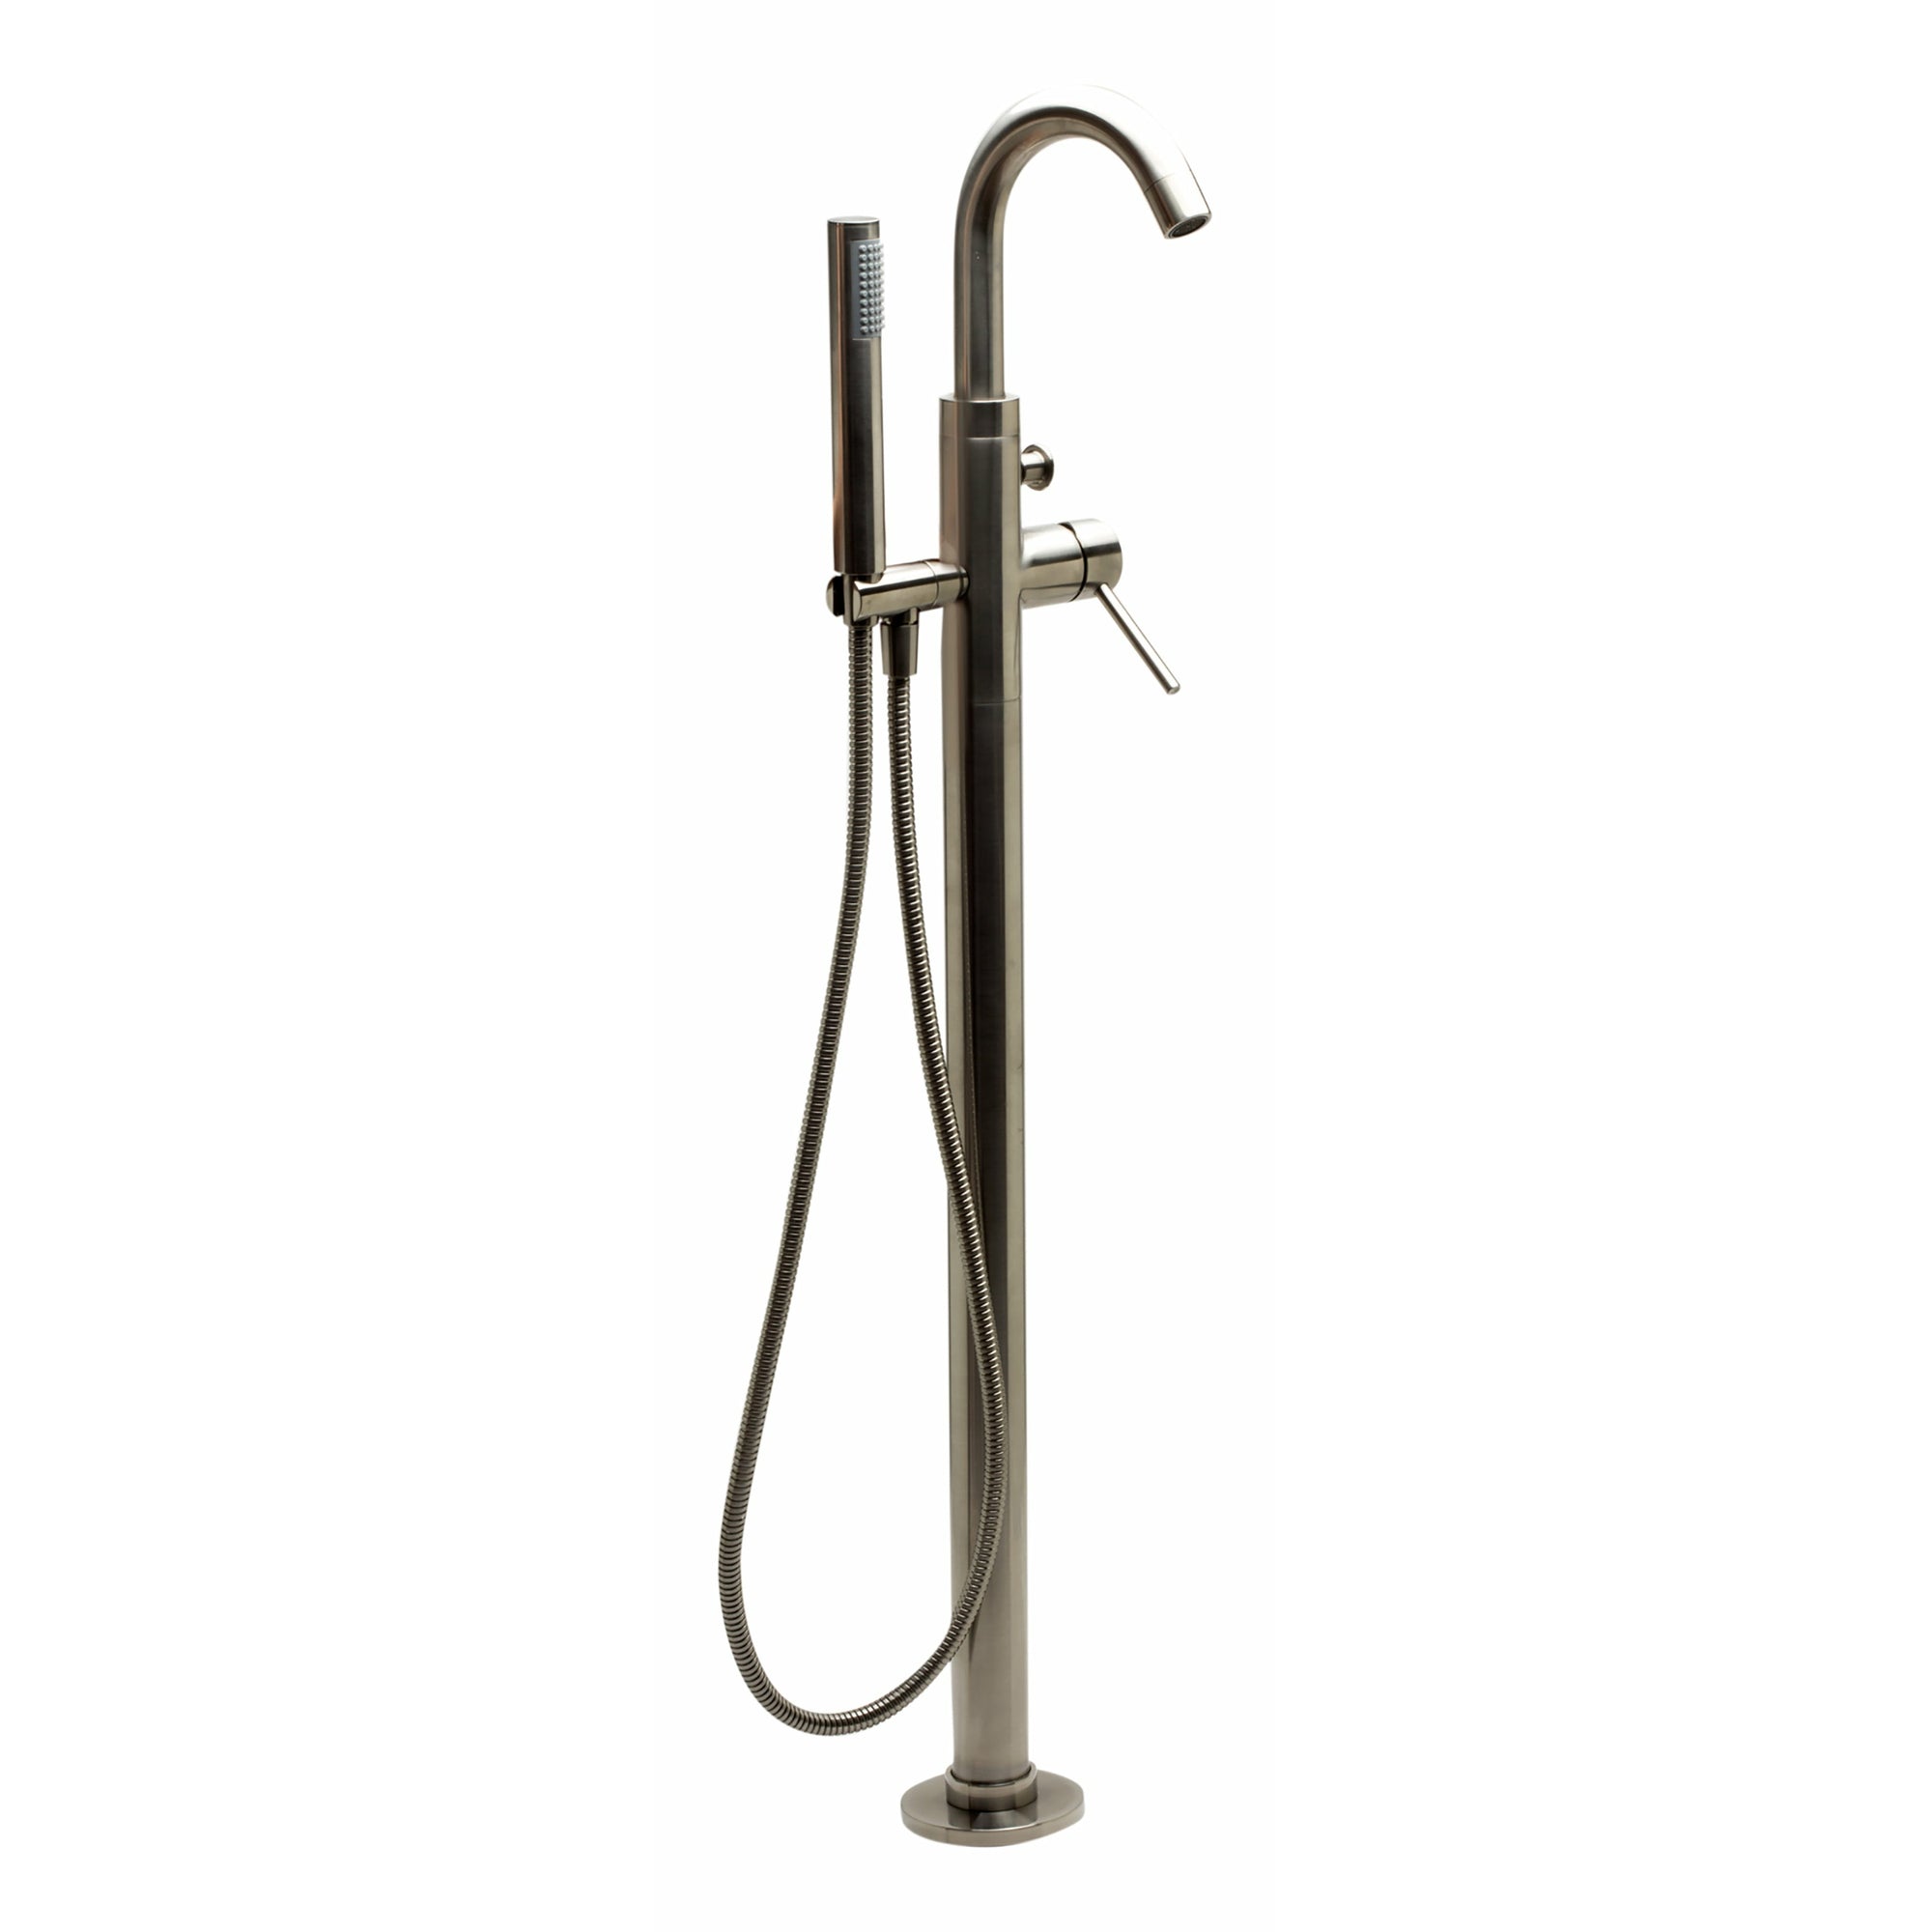 ALFI AB2534 Single Lever Floor Mounted Tub Filler Mixer with Hand Held Shower Head Solid brass construction coated with a Matte Black finish in a white background